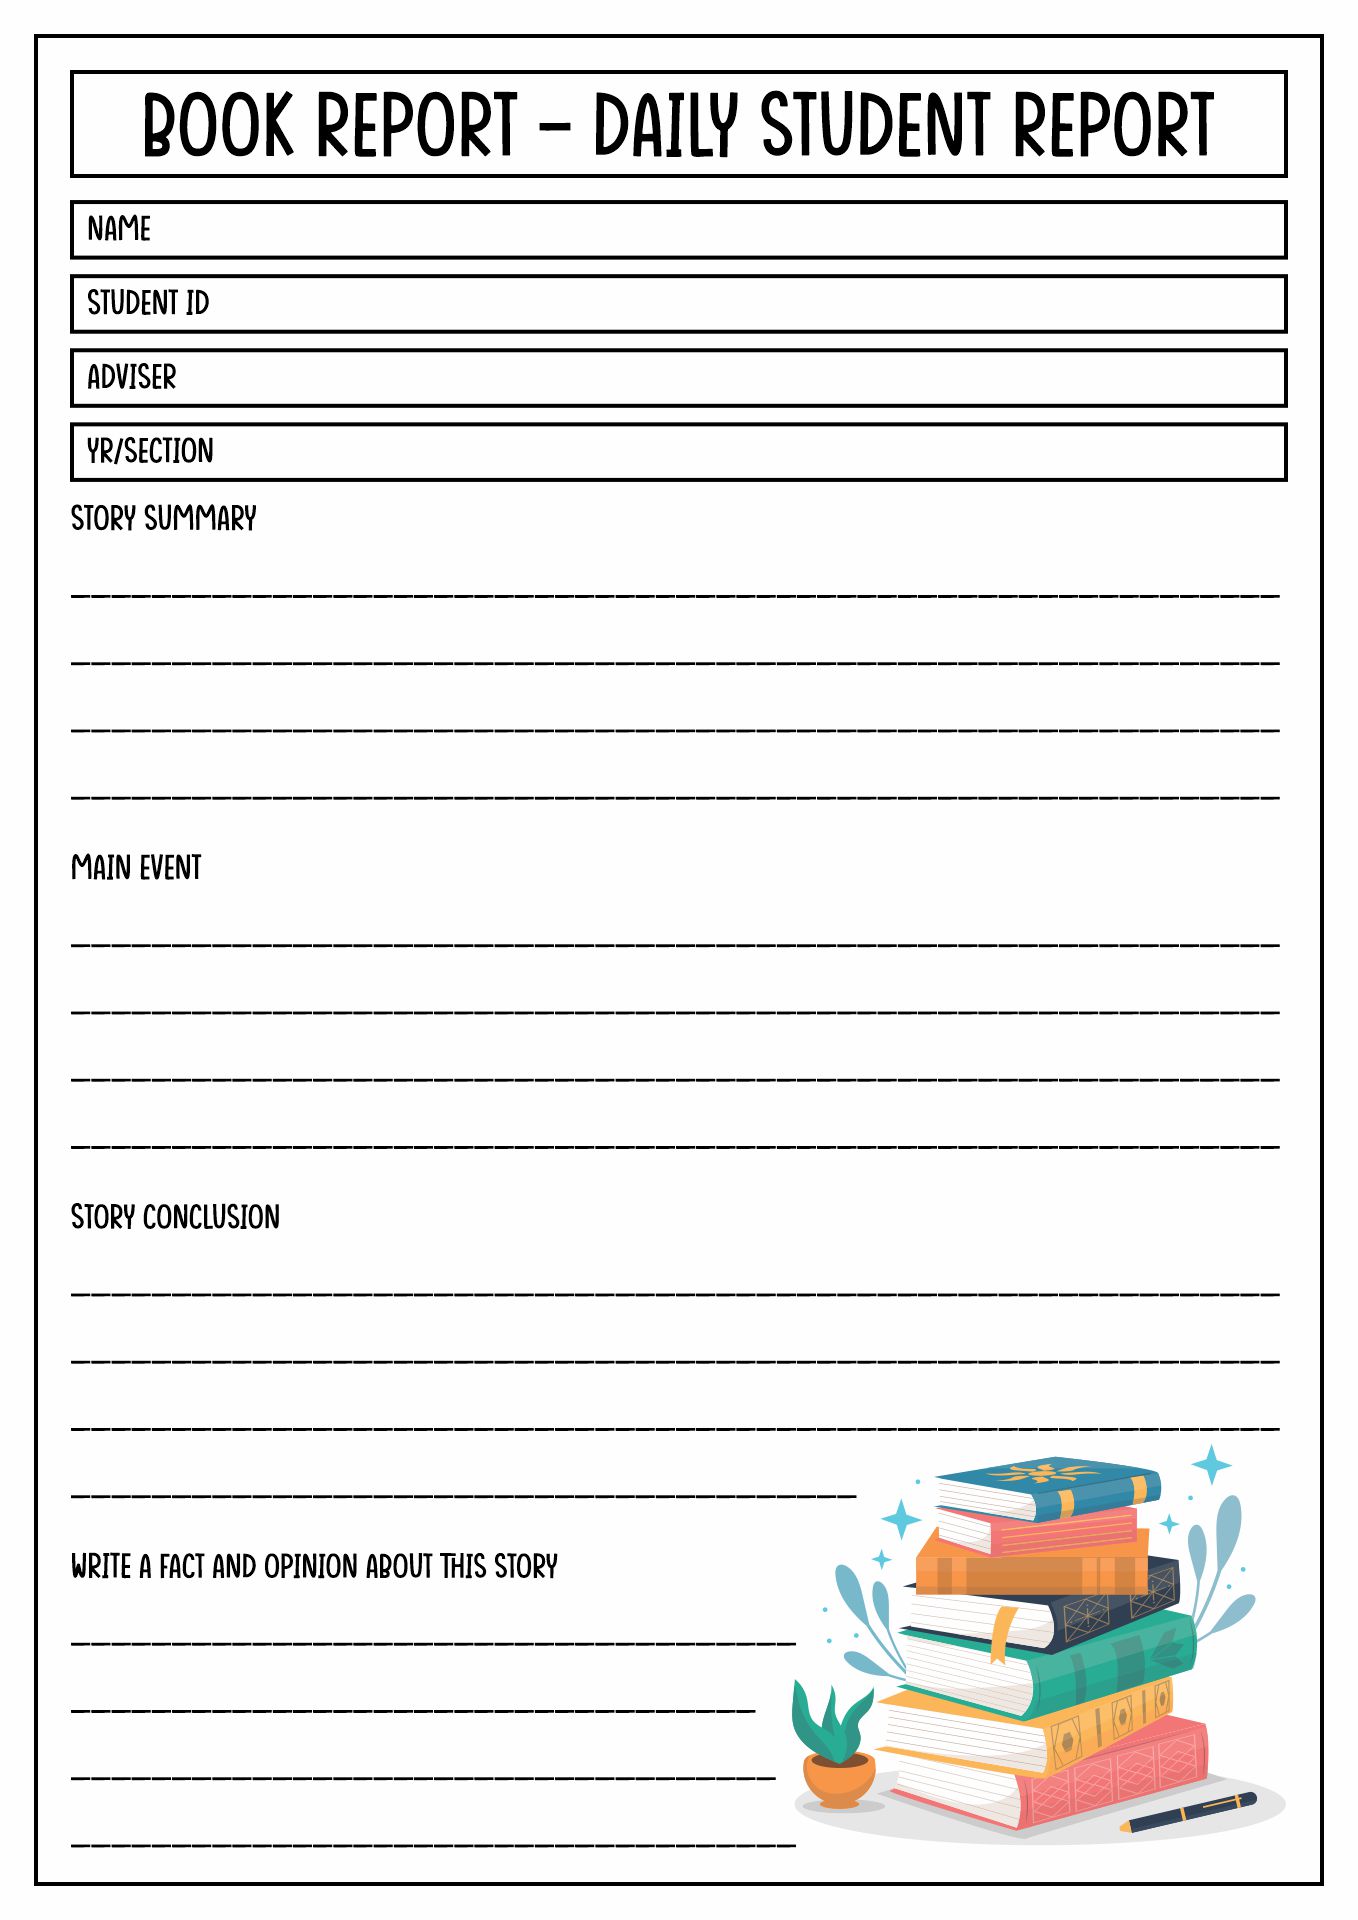 Middle School Book Report Template Image